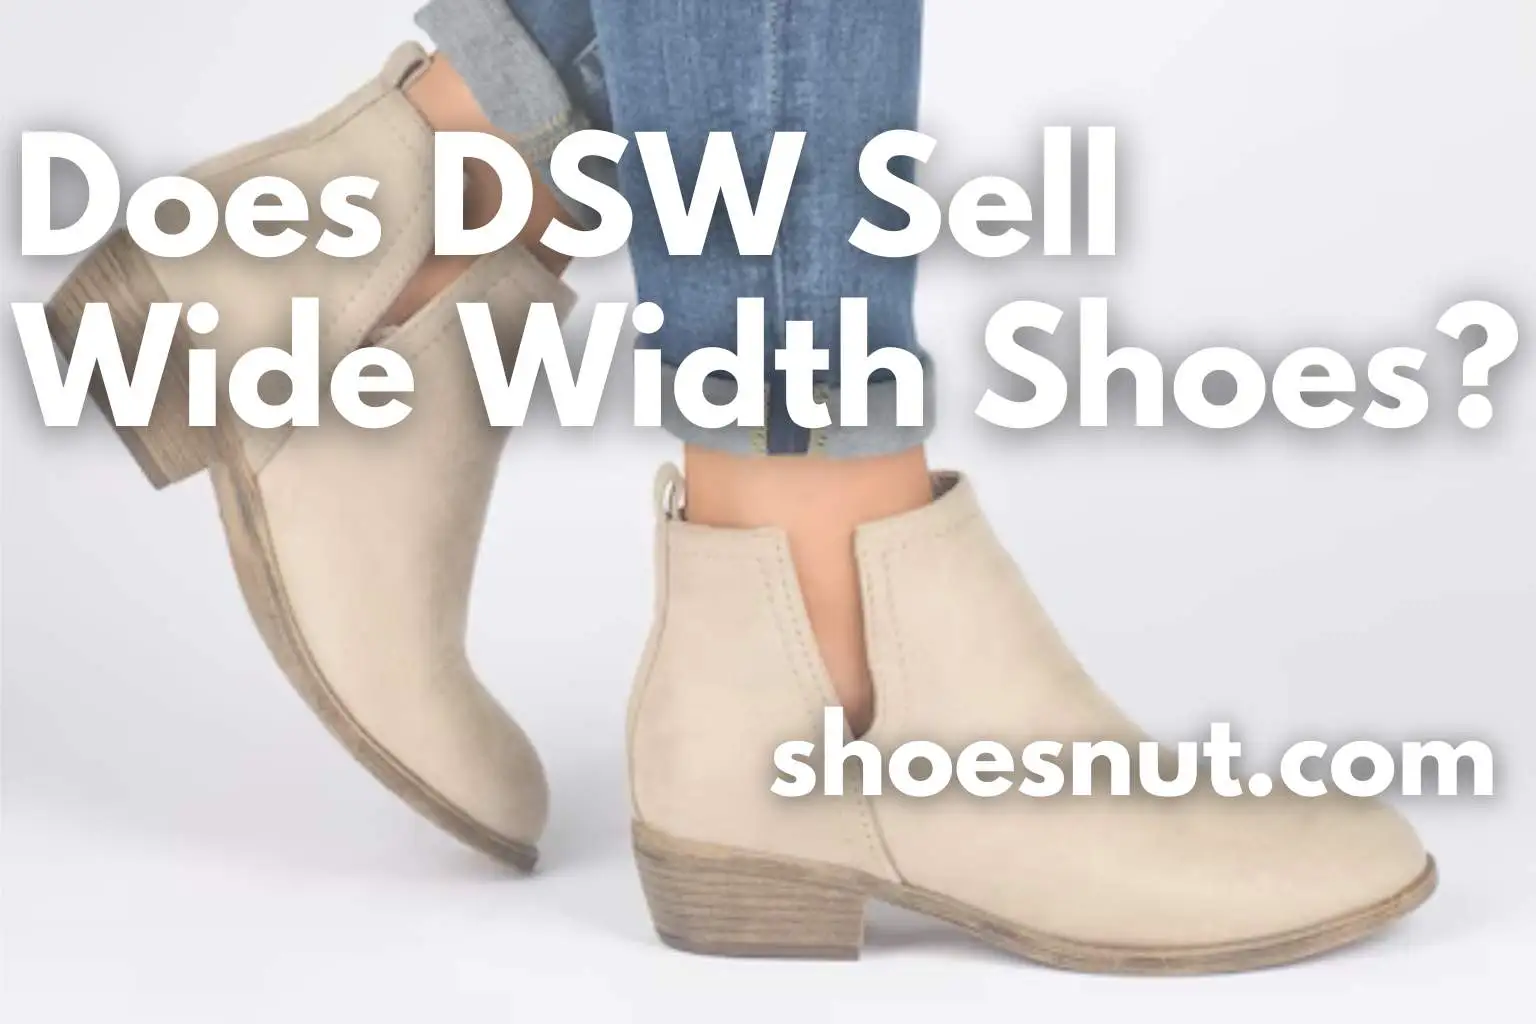 Does DSW Sell Wide Width Shoes?